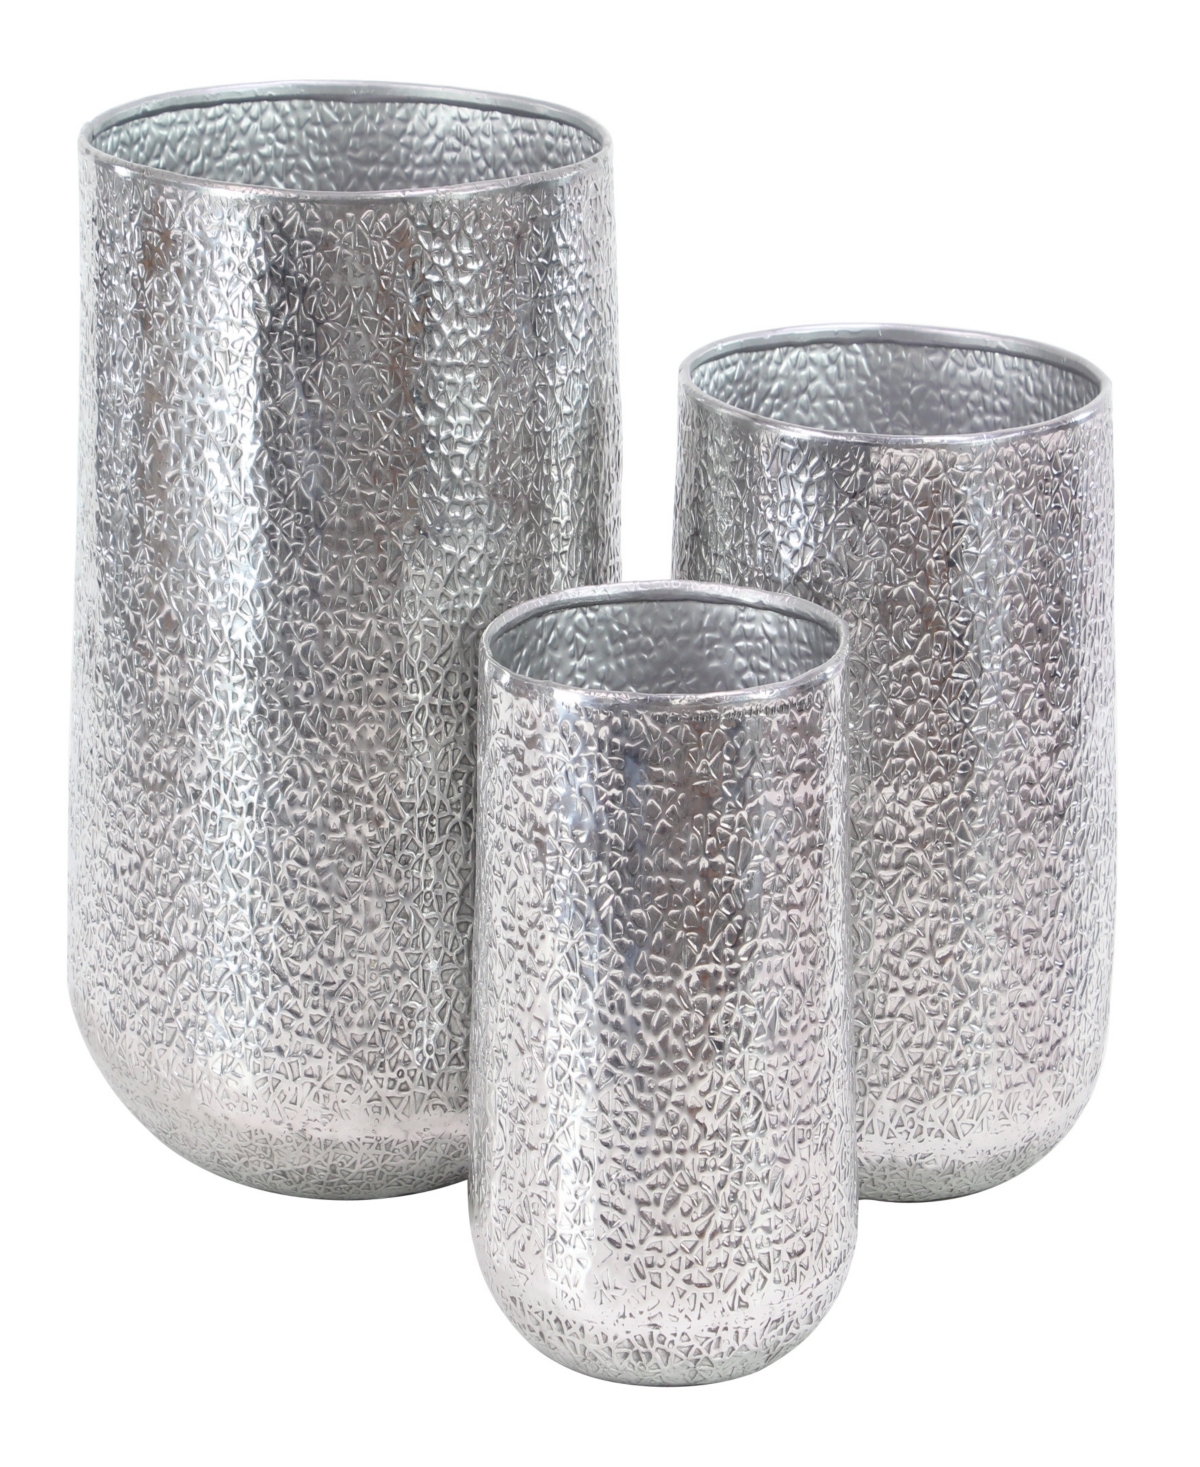 Silver-Tone Aluminum Indoor Outdoor Planter with Hammered Design Set of 3 - Silver